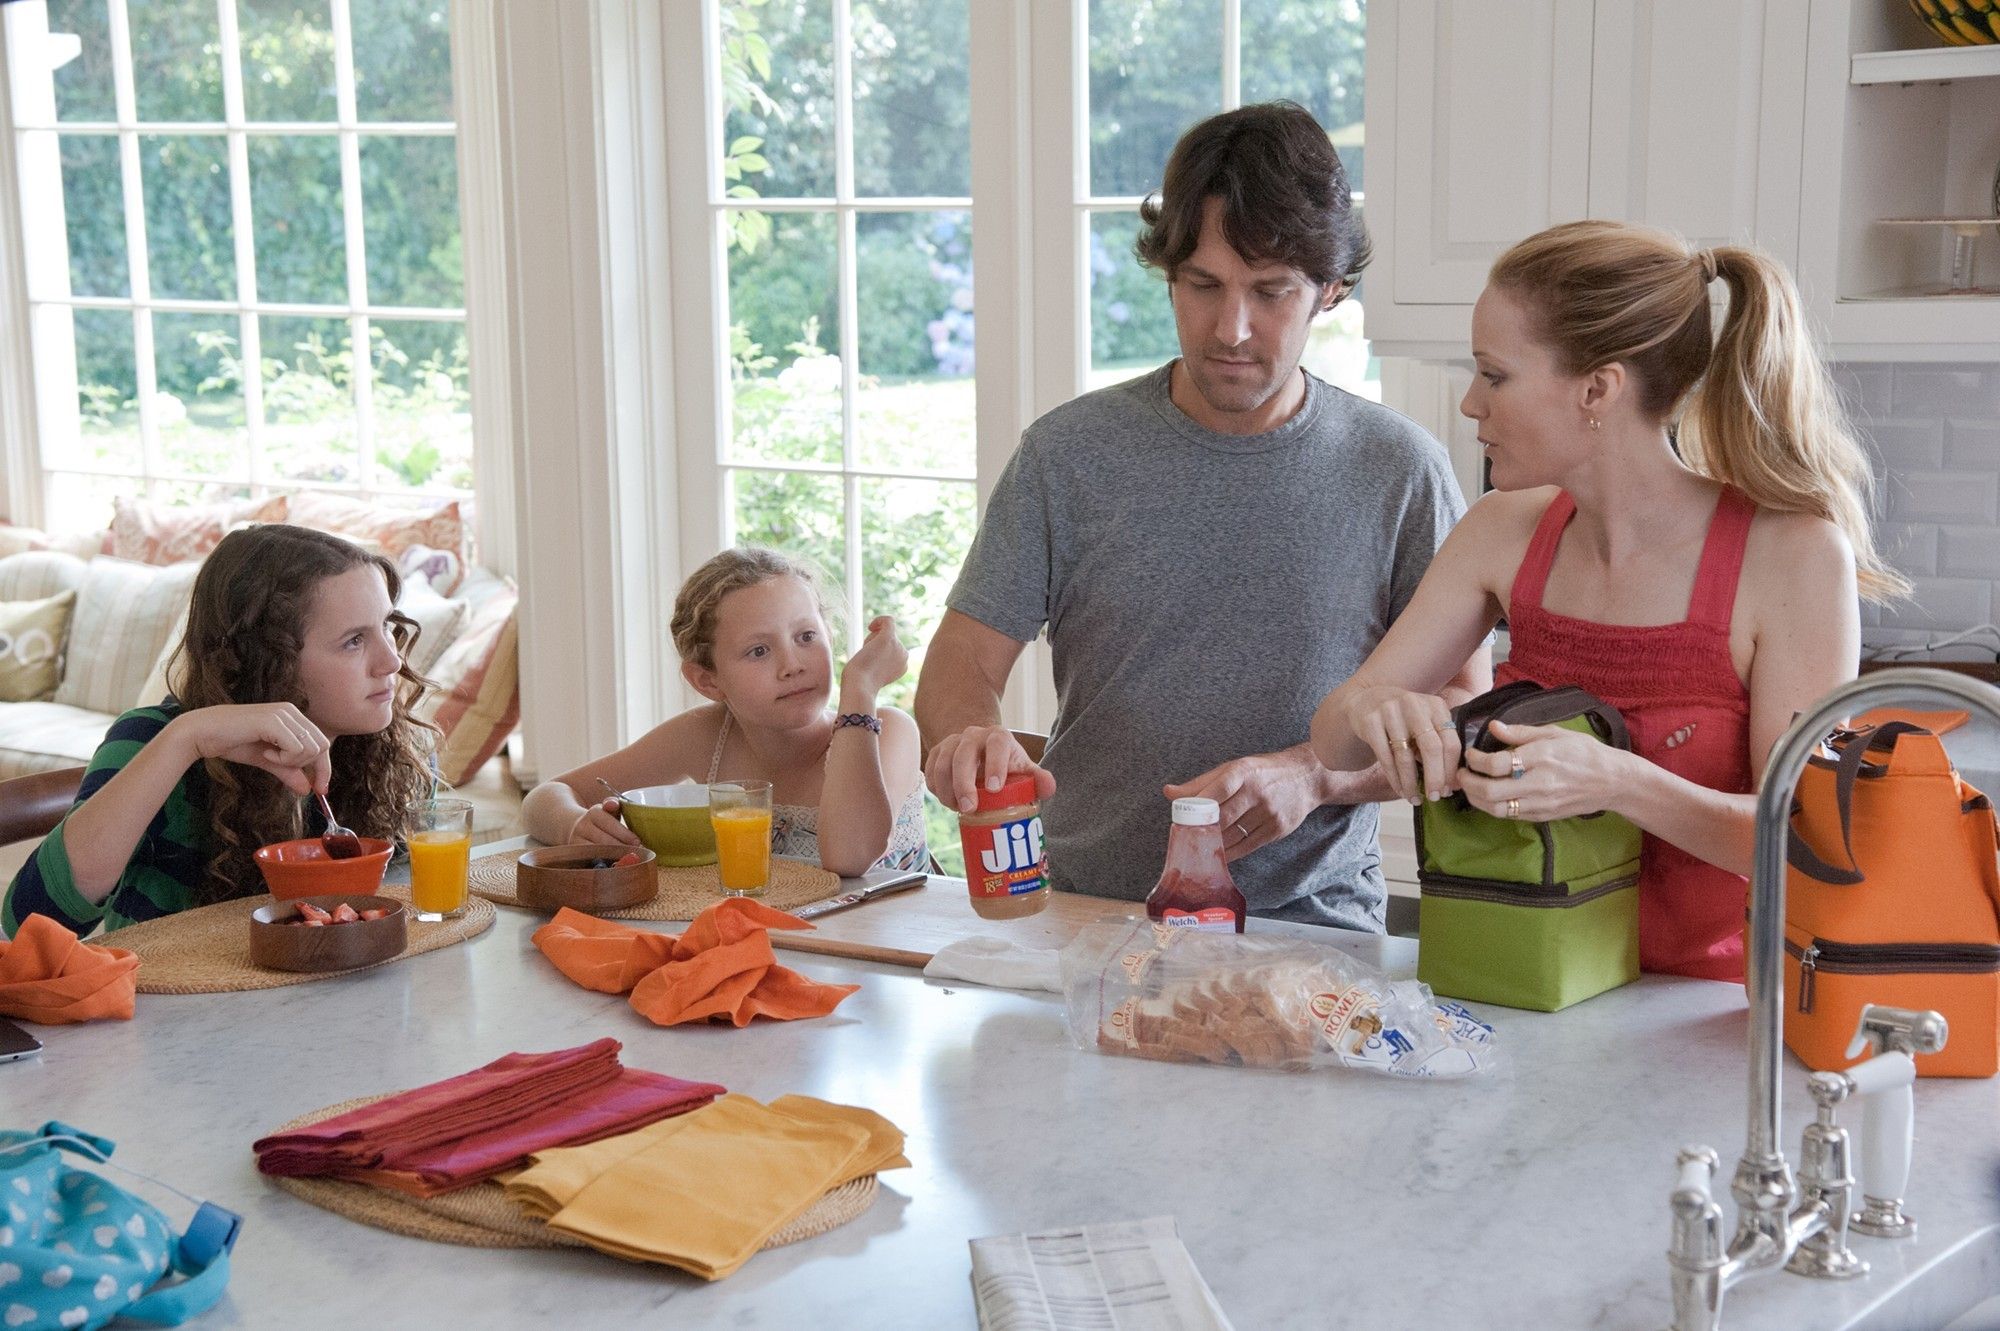 Maude Apatow, Iris Apatow, Paul Rudd and Leslie Mann in Universal Pictures' This Is 40 (2012)